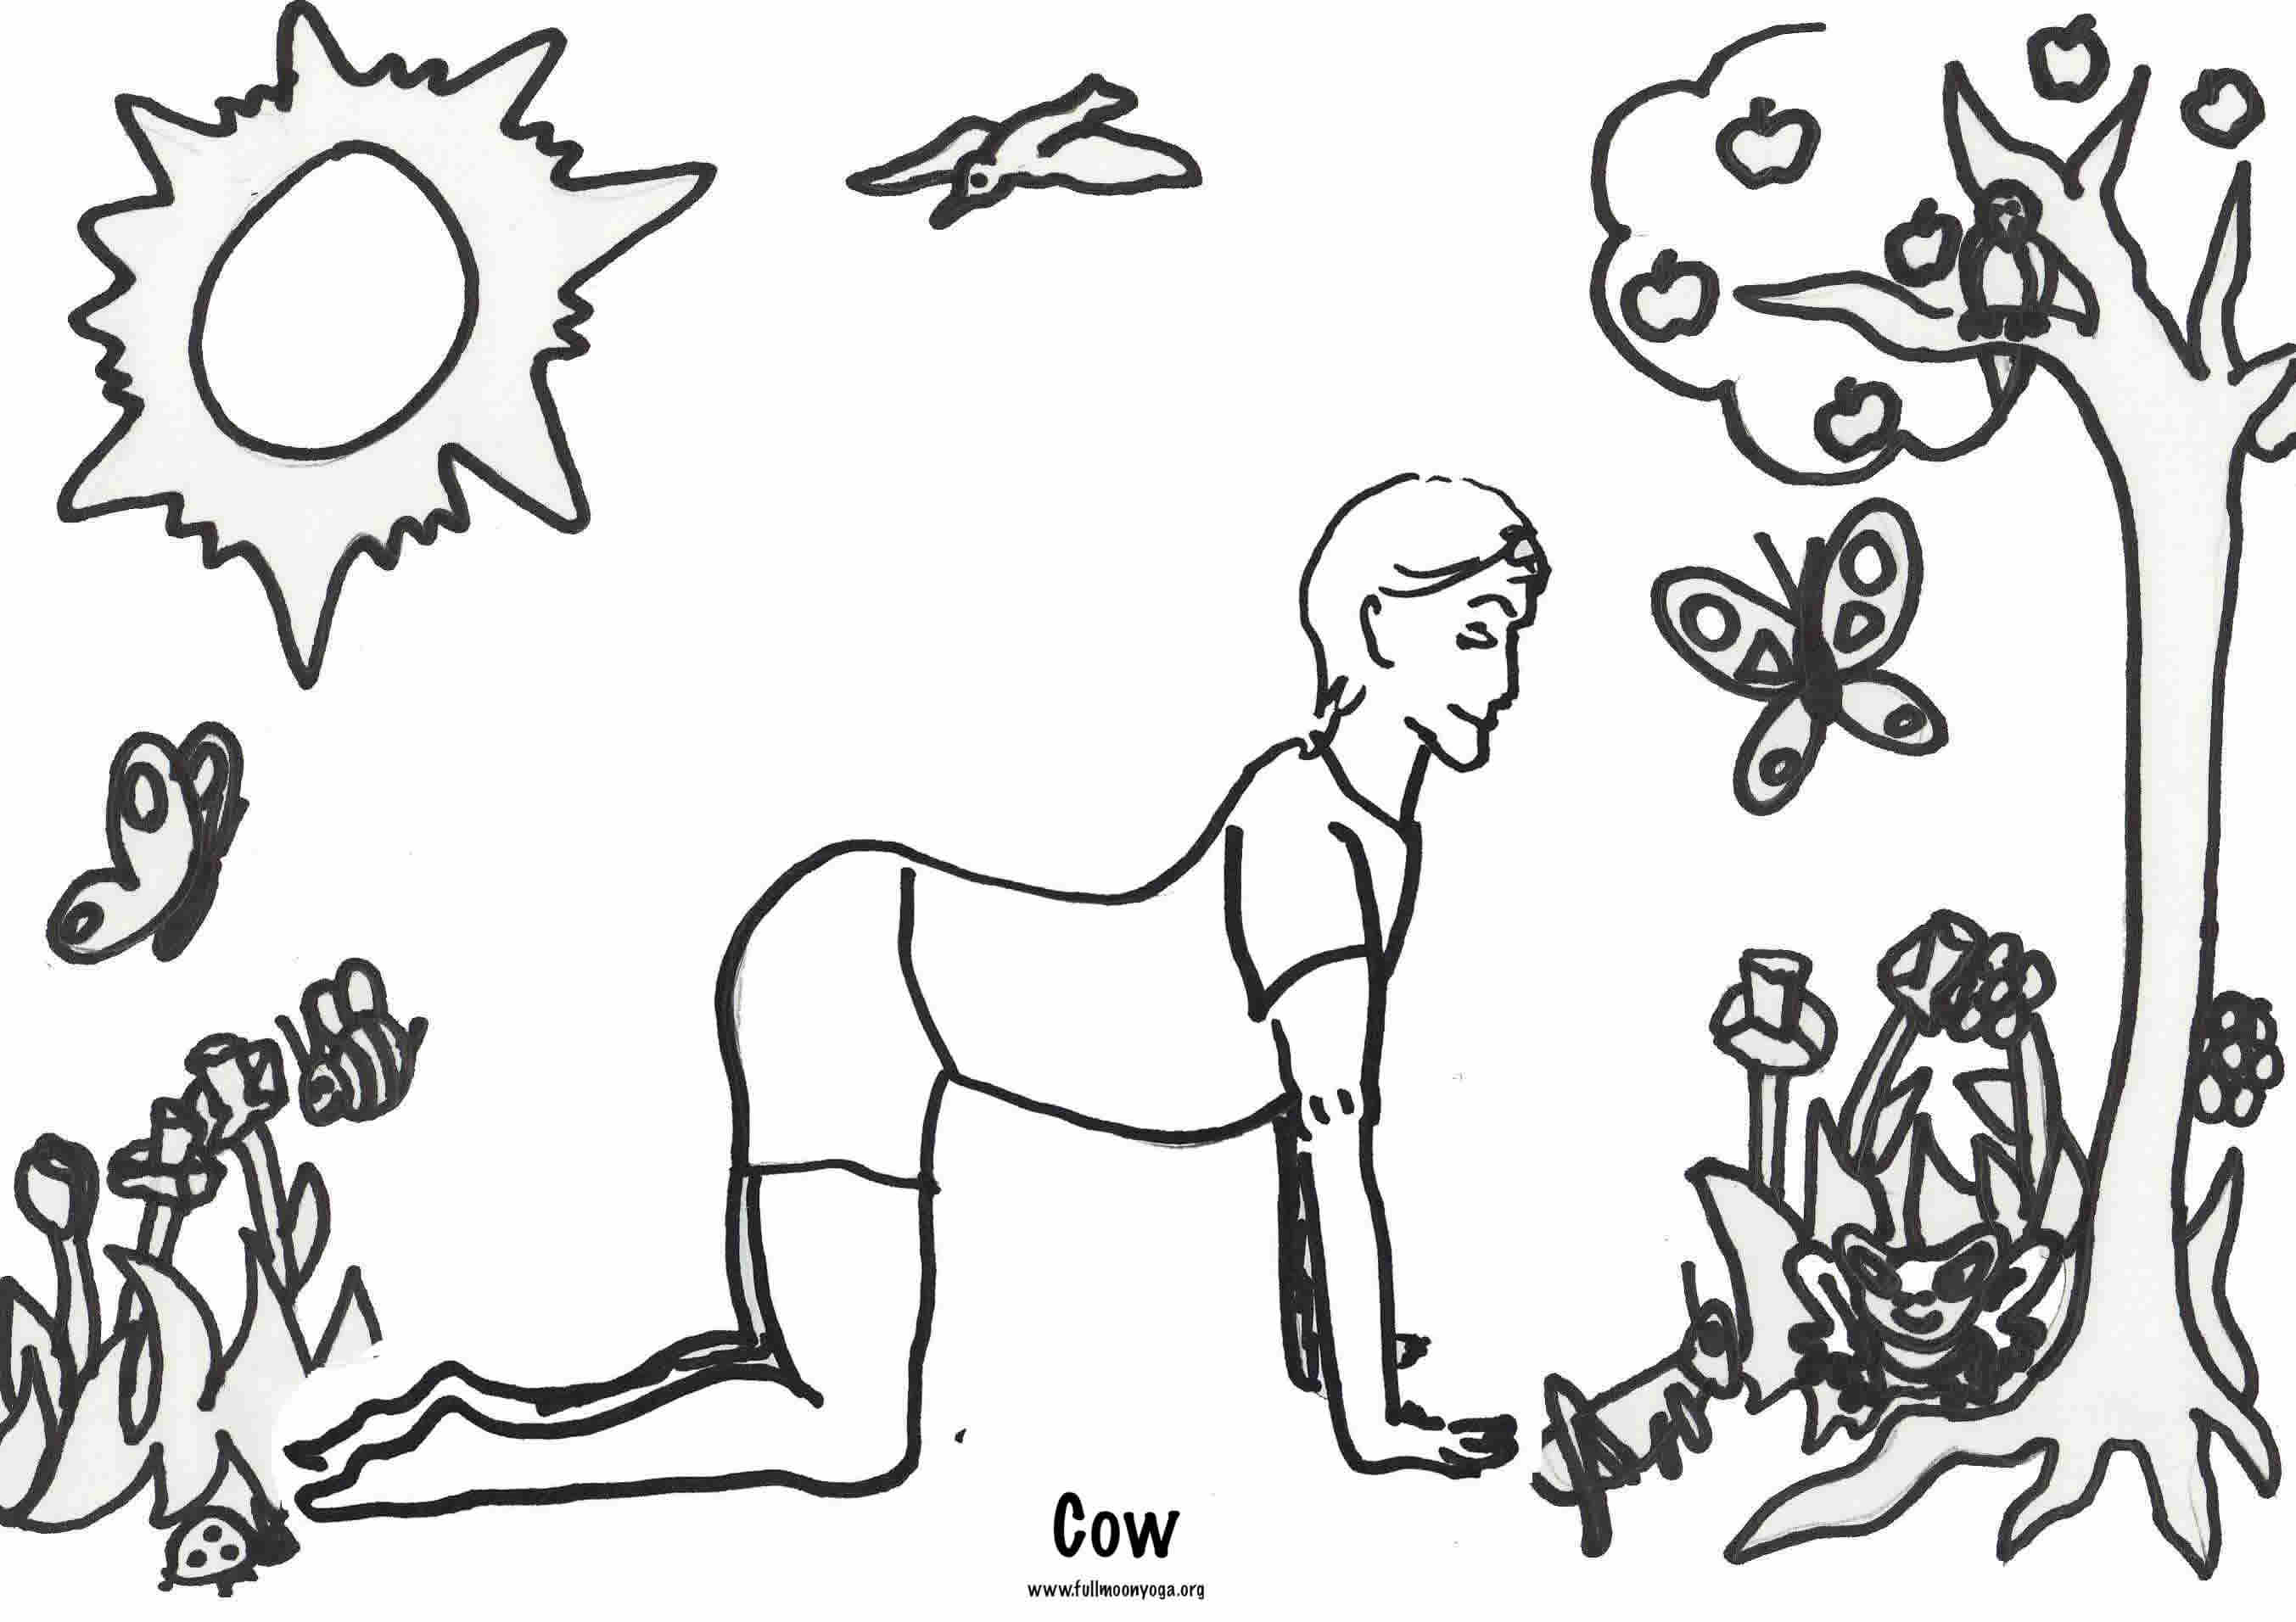 Yoga Poses Coloring Pages at GetDrawings | Free download